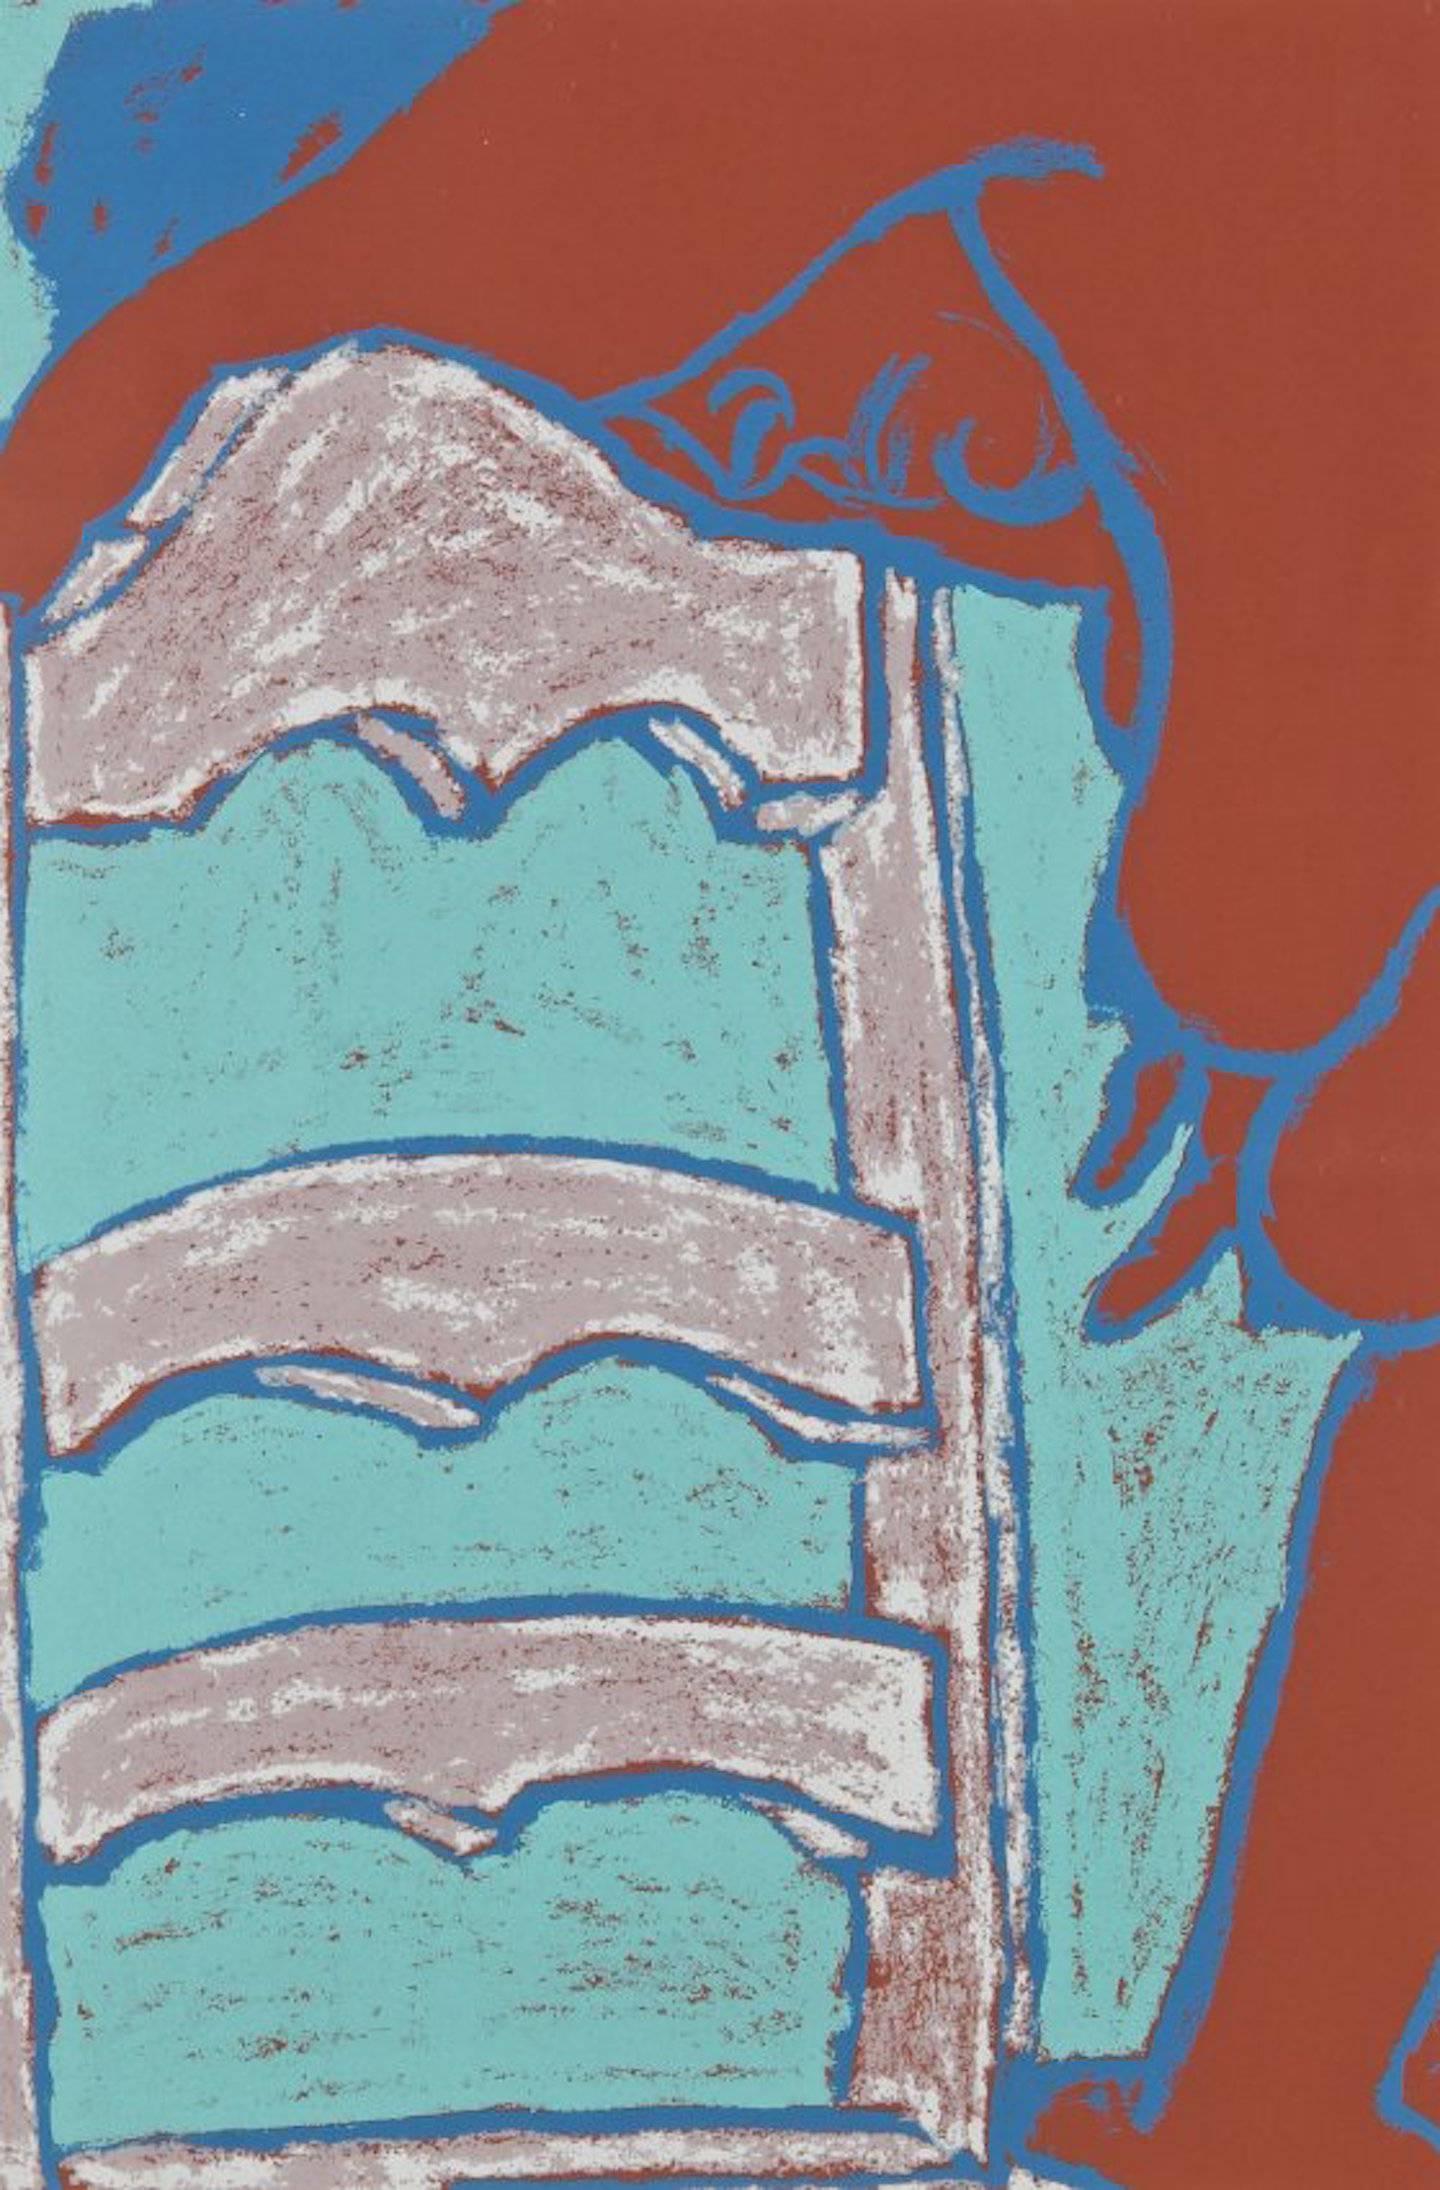 George Segal (American, 1924-2000).
Signed & dated lower right, numbered lower left.
Medium: Color serigraph.
Creation date: 1978.
Edition number: 30/135.
Dimensions: 17